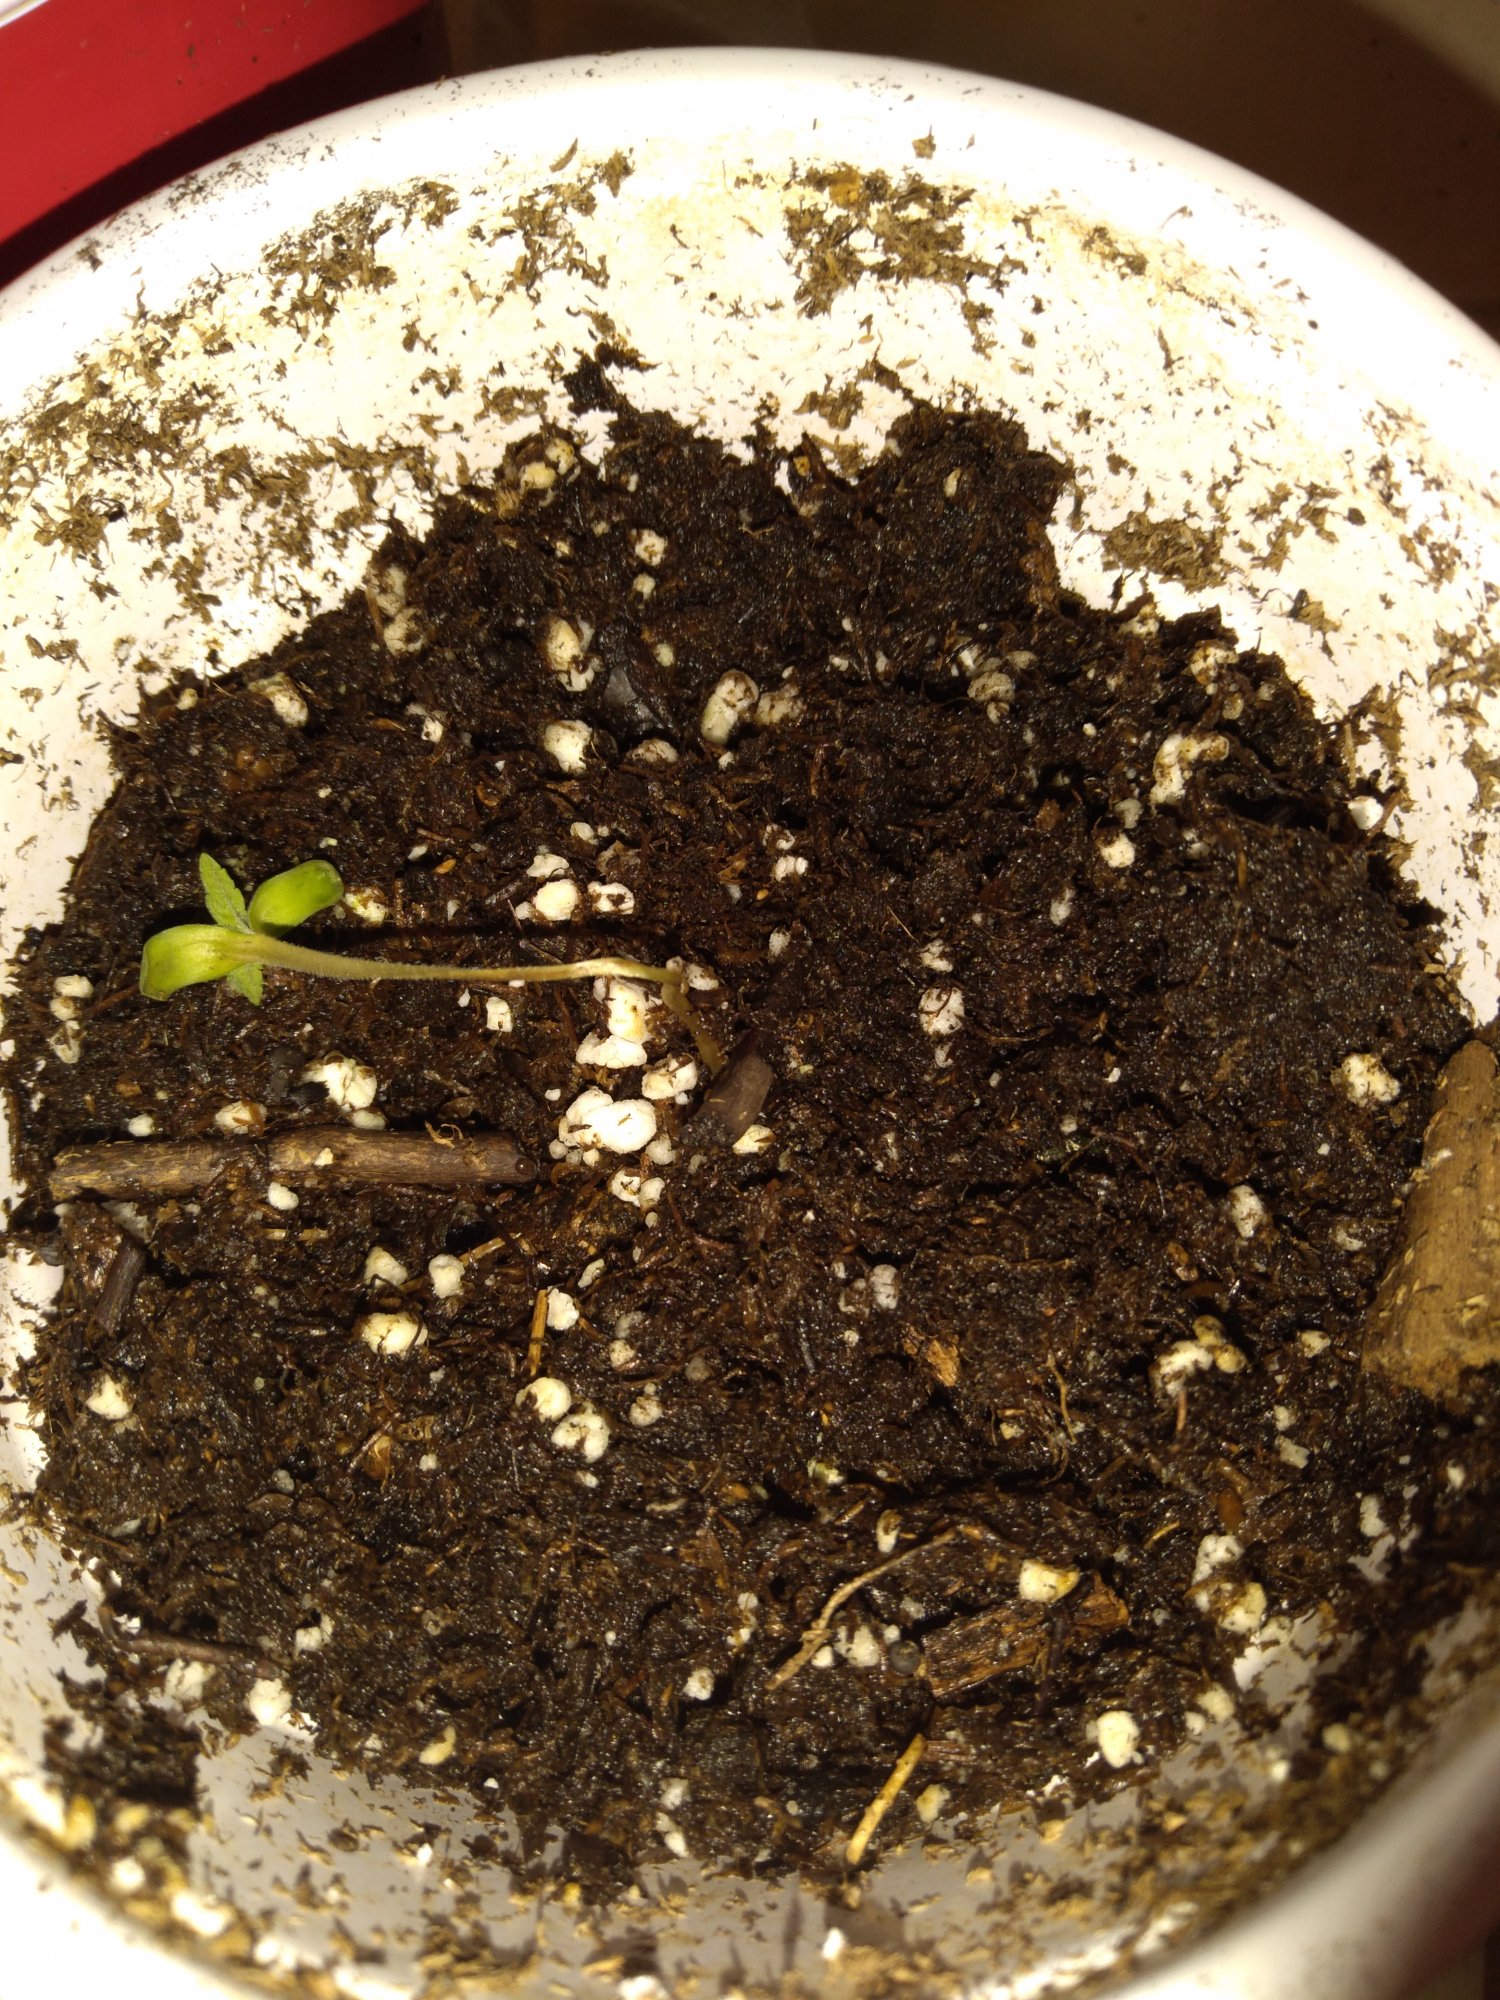 Seedlings keep wilting over and  dying